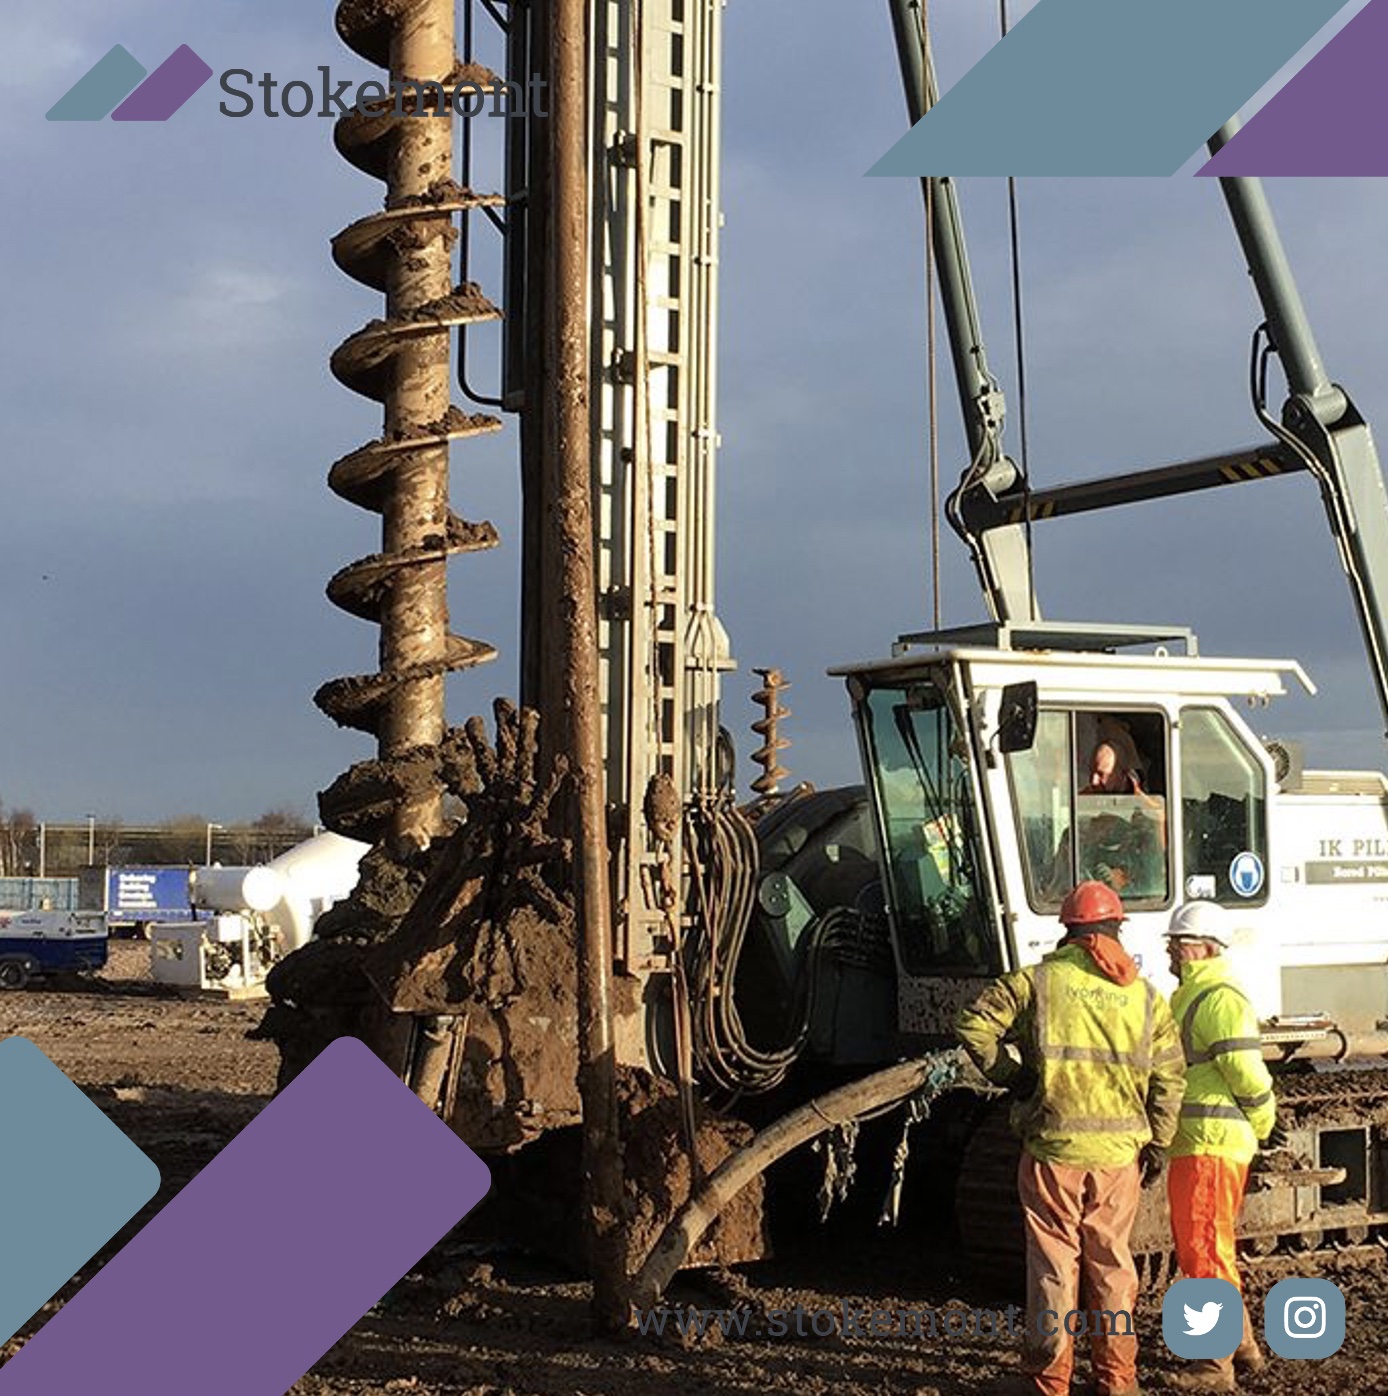 Building Excellence: Professional Drilling Piles Service in Housing Development